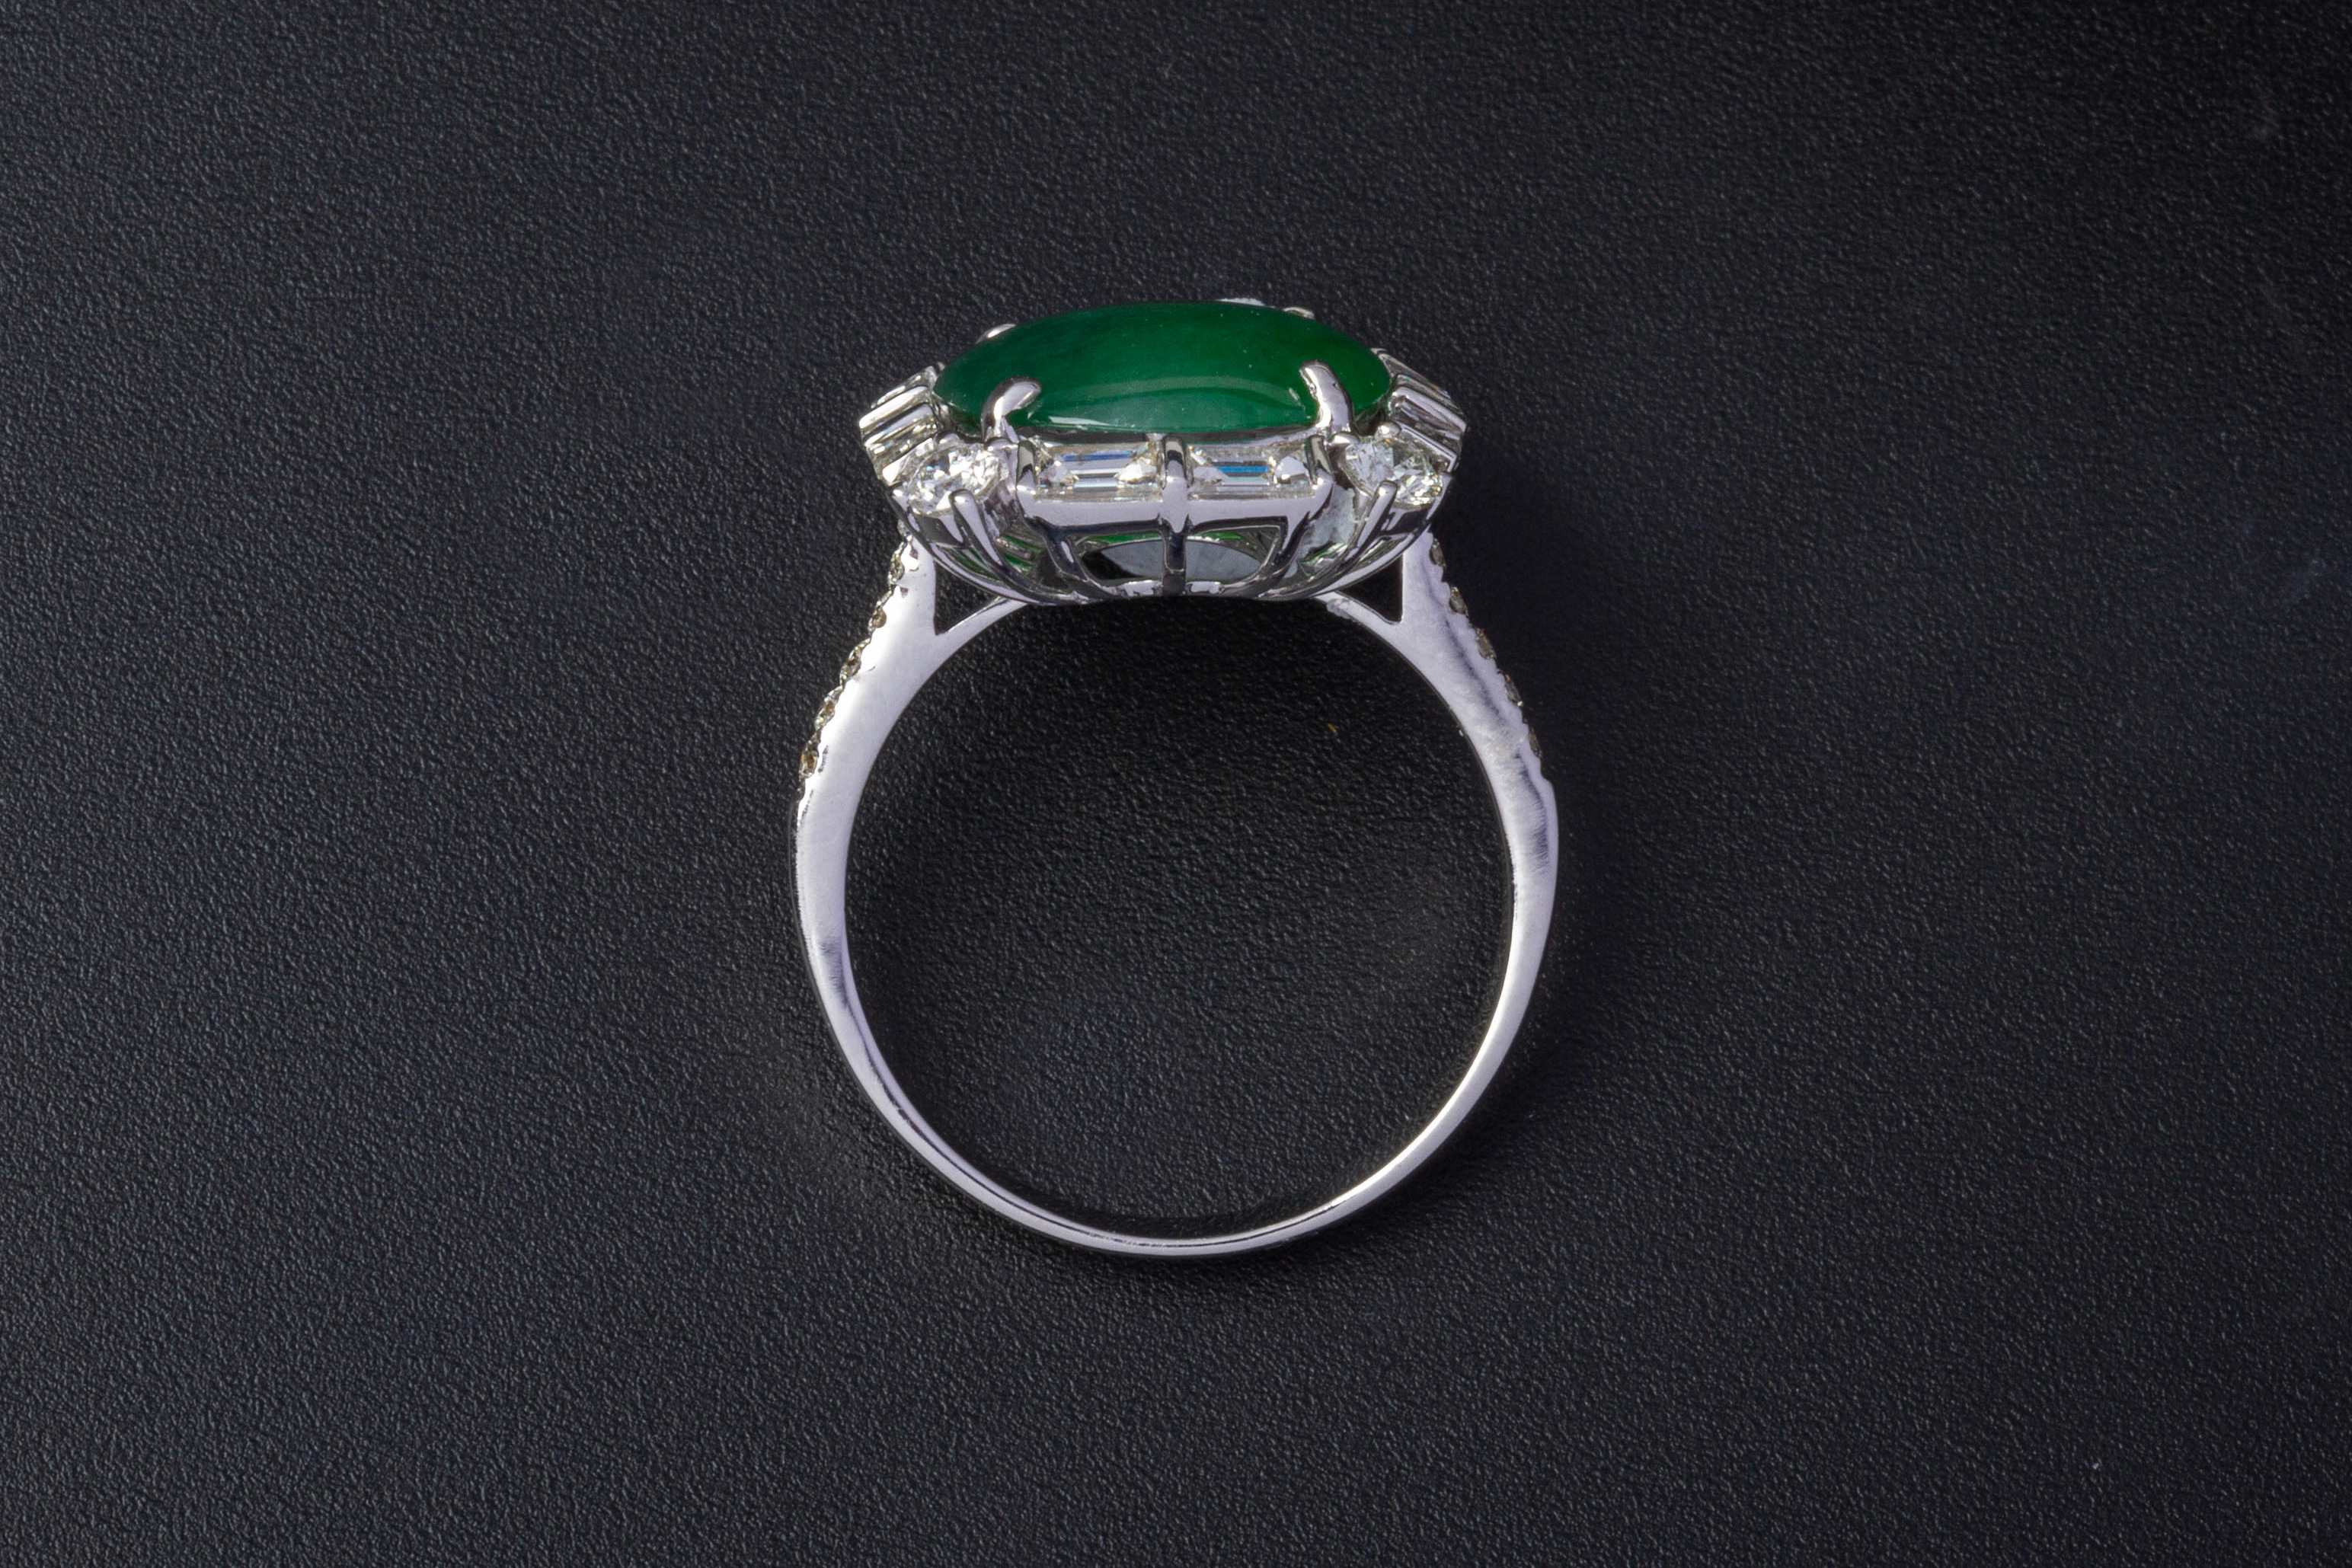 A TYPE A JADEITE AND DIAMOND RING - Image 3 of 4